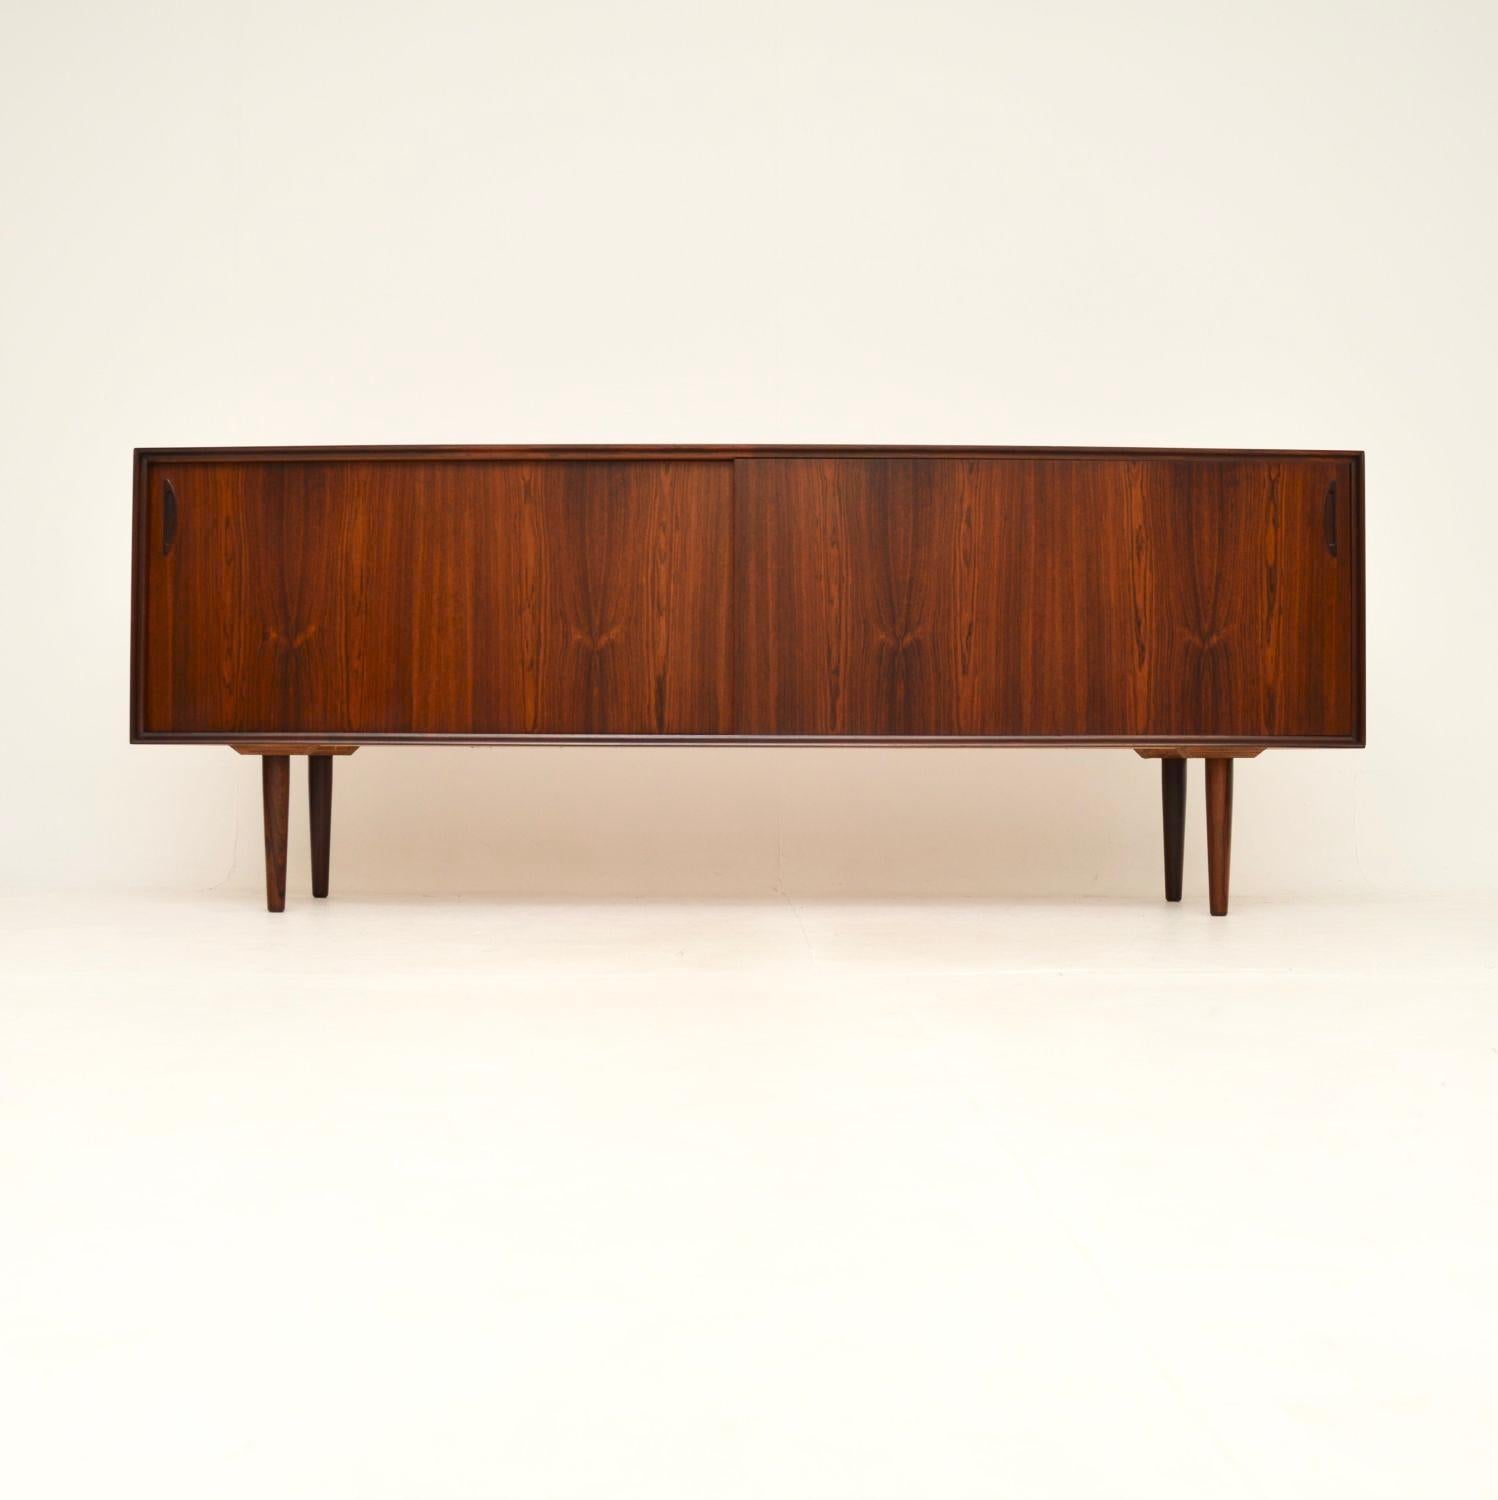 An absolutely stunning and extremely well made Danish vintage sideboard. This was made in Denmark in the 1960’s.

The quality is outstanding, this is beautifully designed with a gorgeous, sleek appearance. The colour tones and grain patterns are